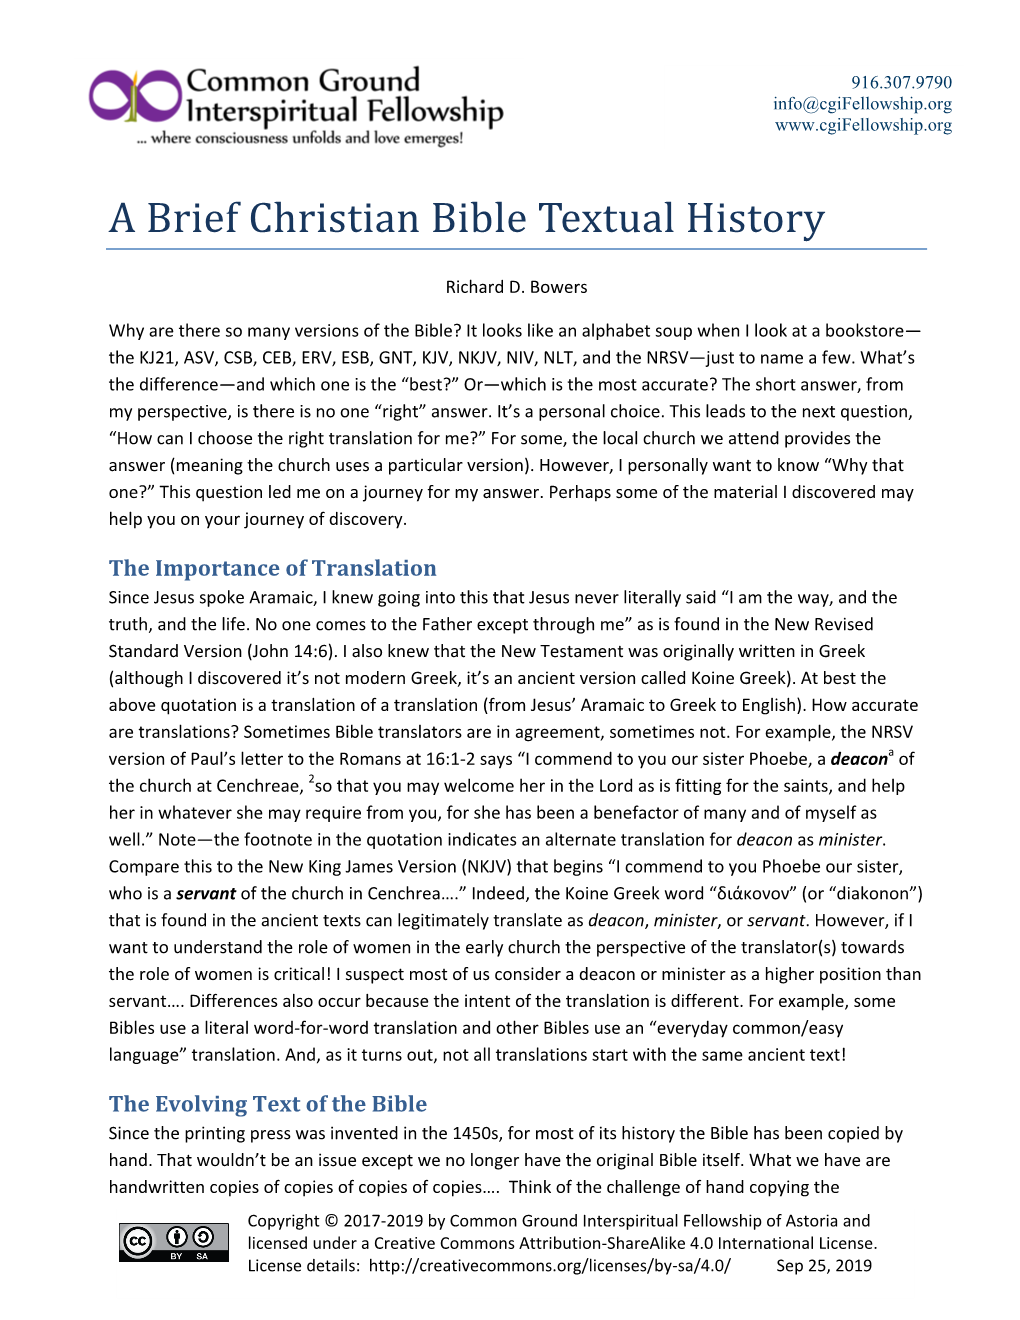 A Brief Christian Bible Textual History